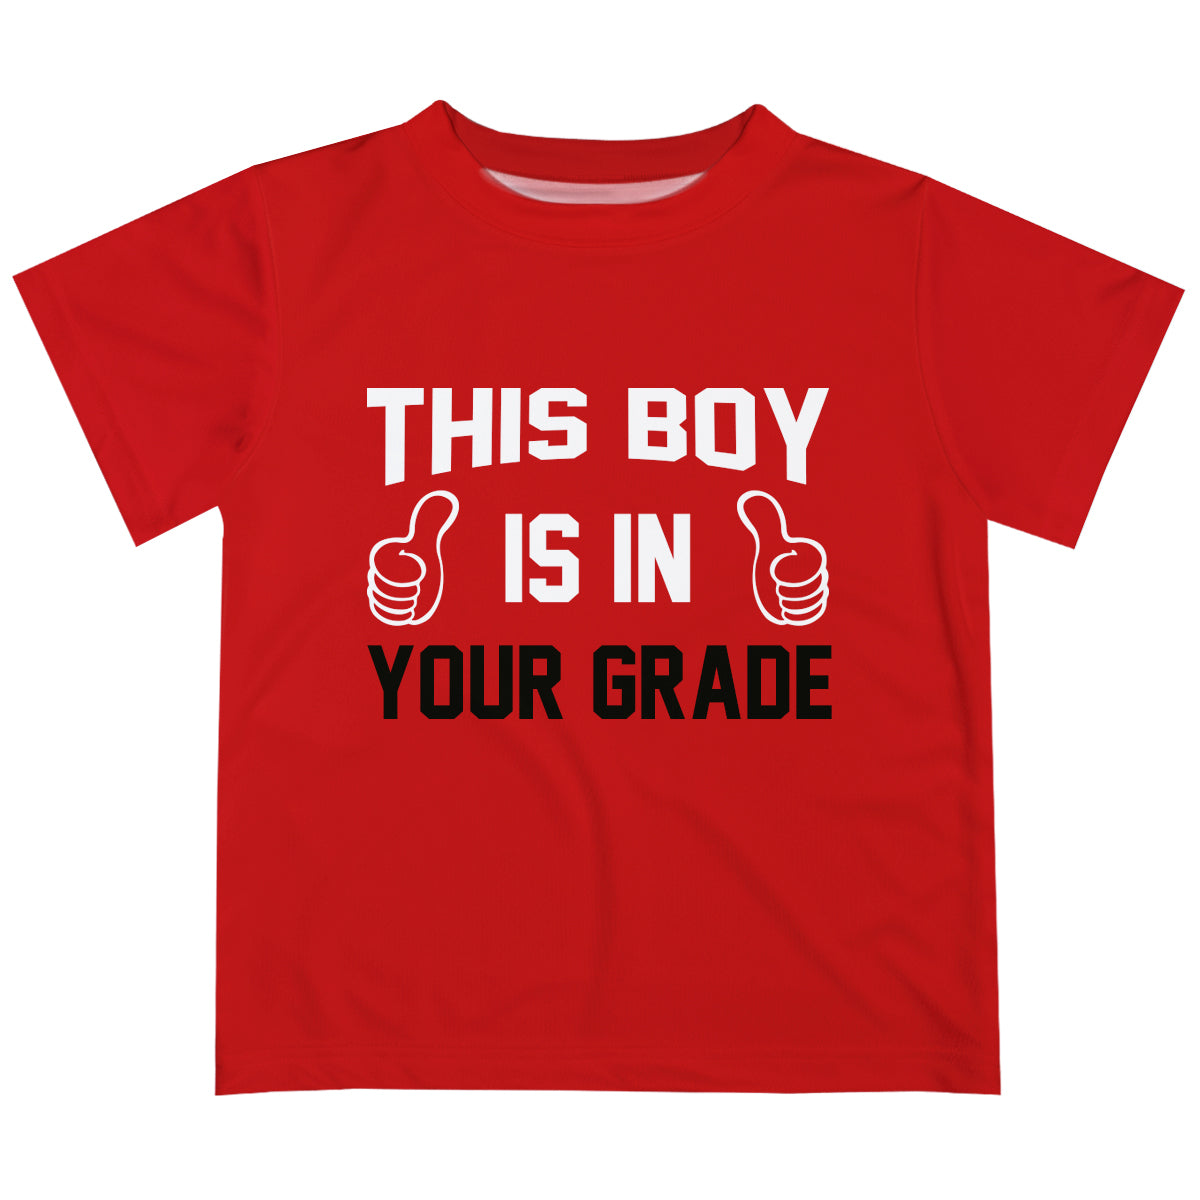 This Boy Is In Your Grade Red Short Sleeve Tee Shirt